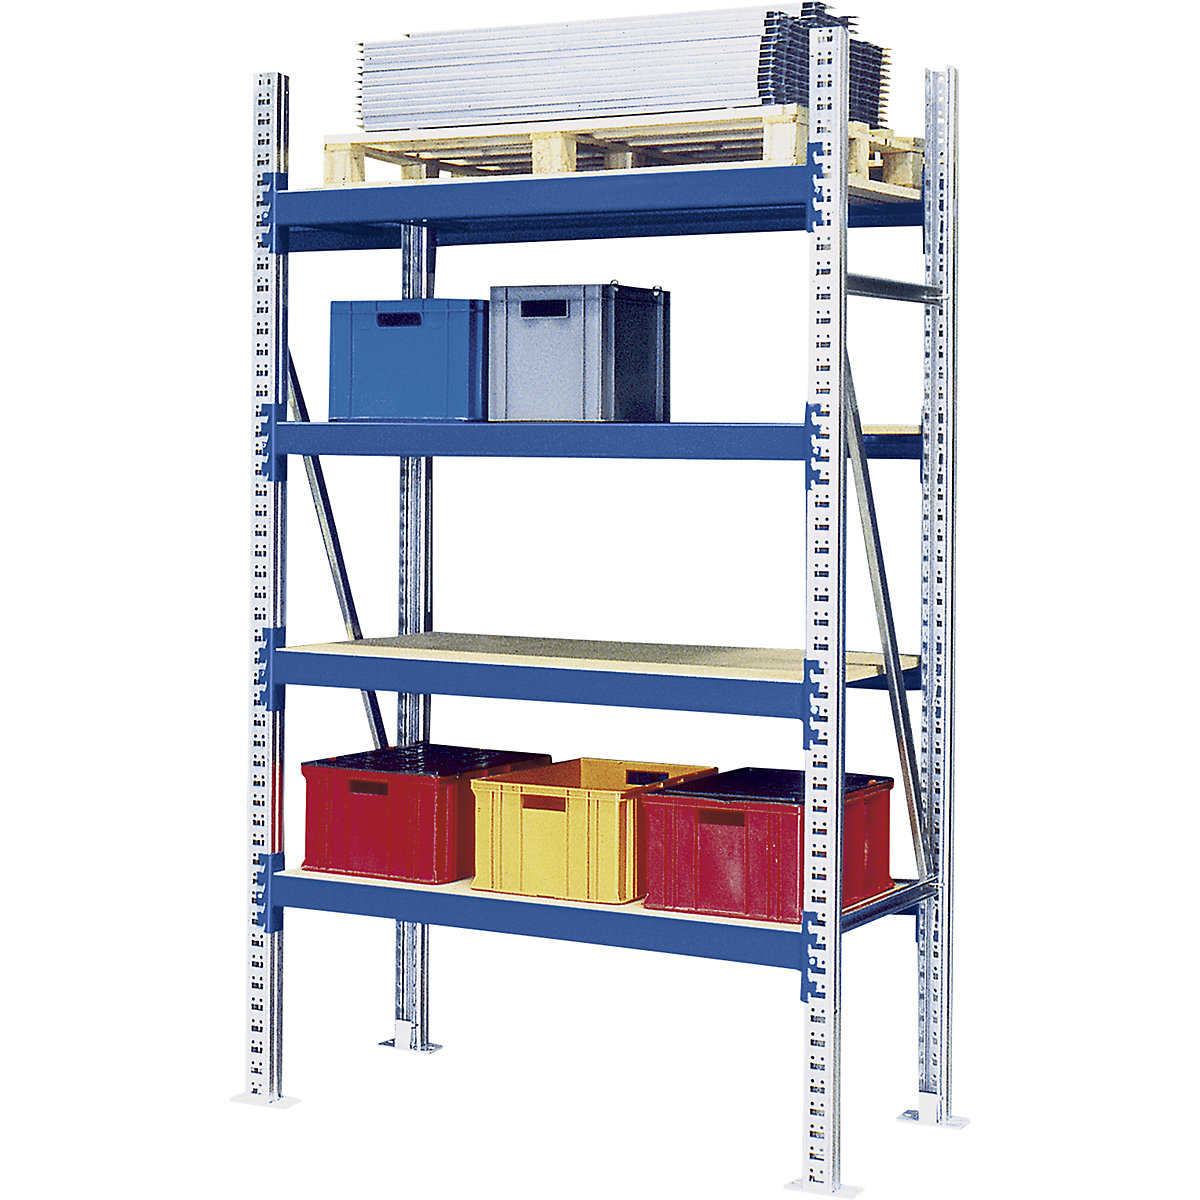 Rayonnage extra-large grande capacité – eurokraft pro, charge max. / rayonnage 4000 kg, h x l x p 2500 x 1350 x 600 mm, rayonnage additionnel, bleu RAL 5010-2